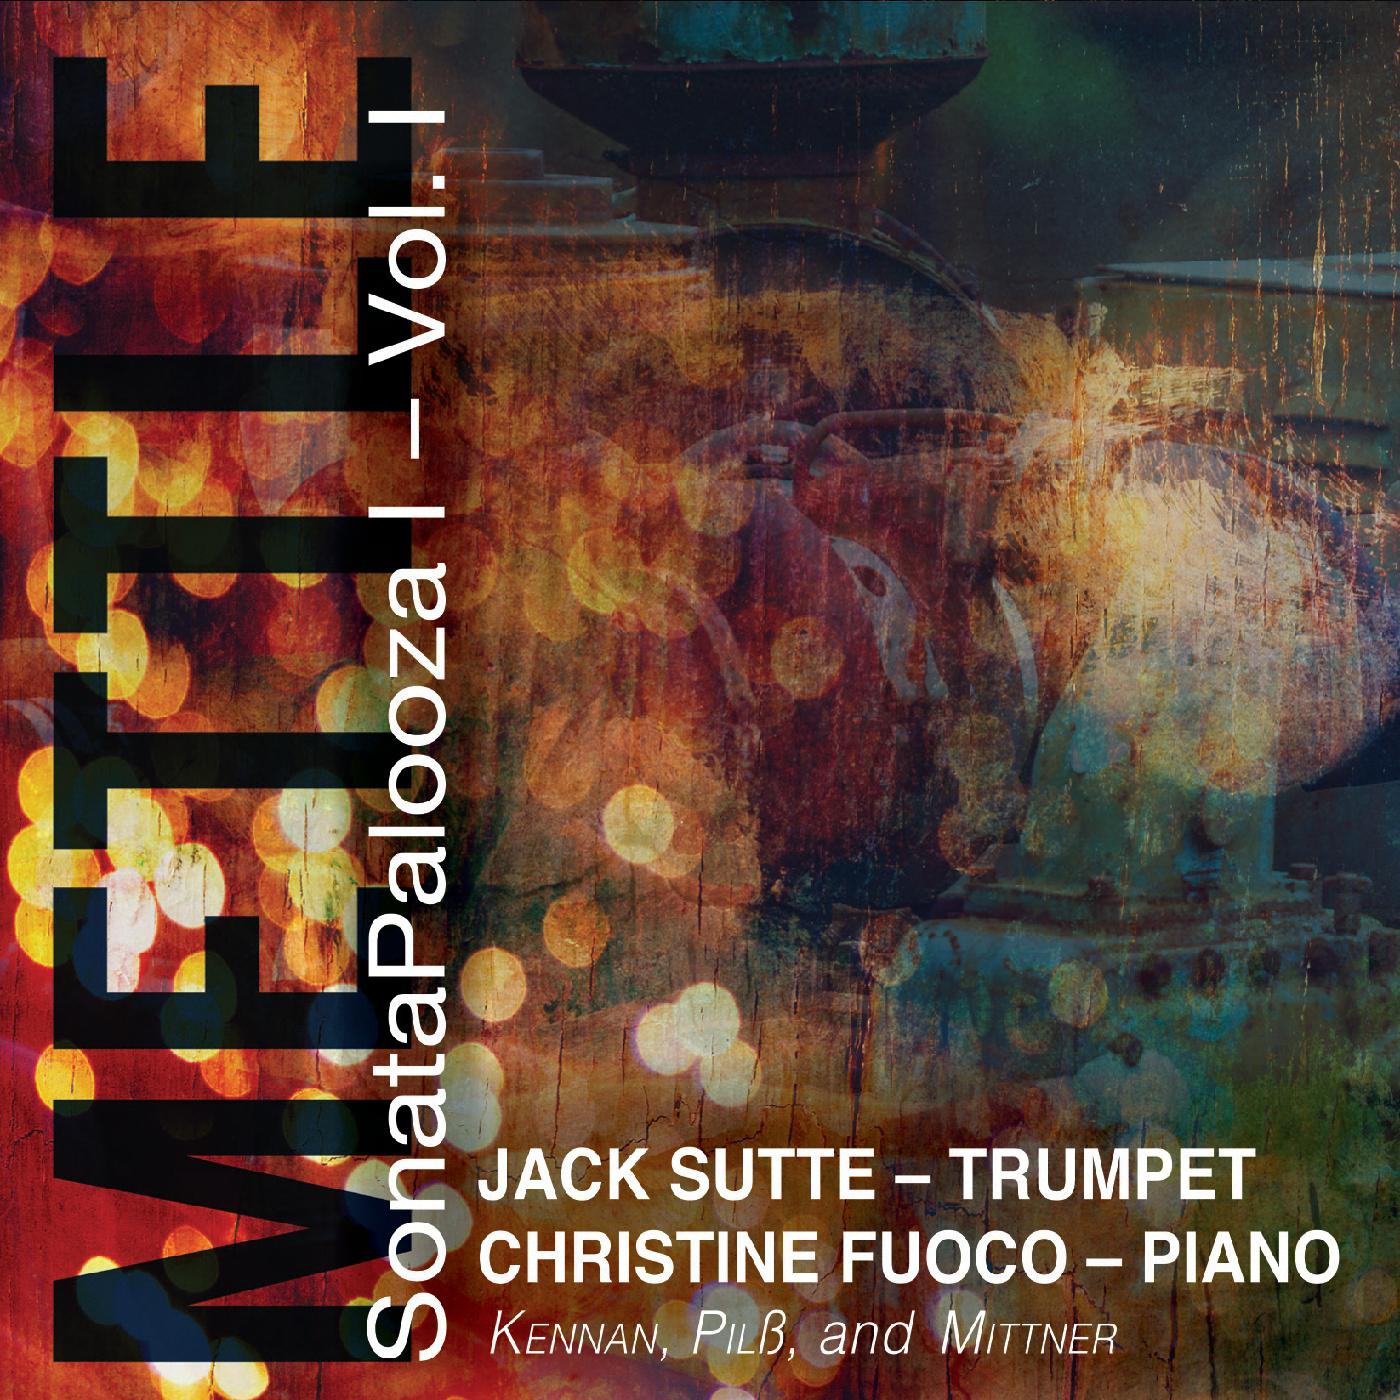 Jack Sutte - Sonata for Trumpet and Piano: I. With Strength and Vigor